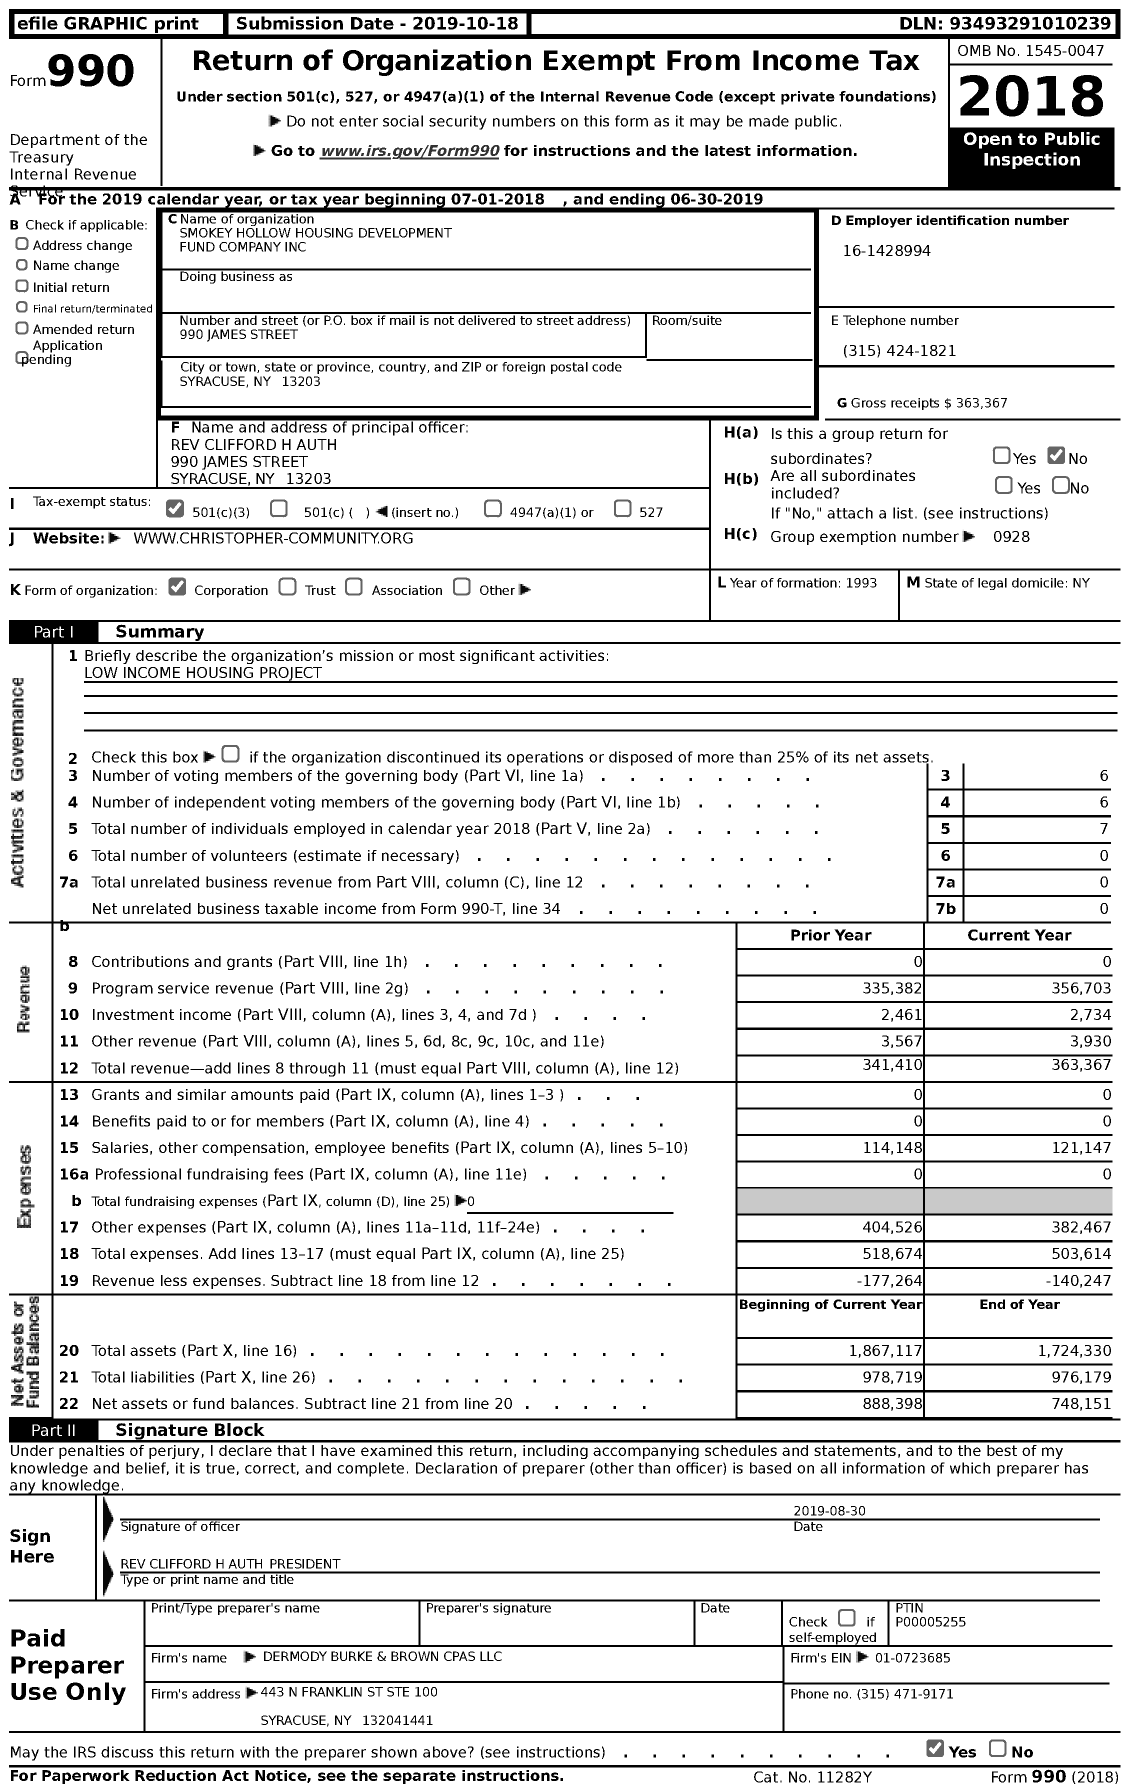 Image of first page of 2018 Form 990 for Smokey Hollow Housing Development Fund Company